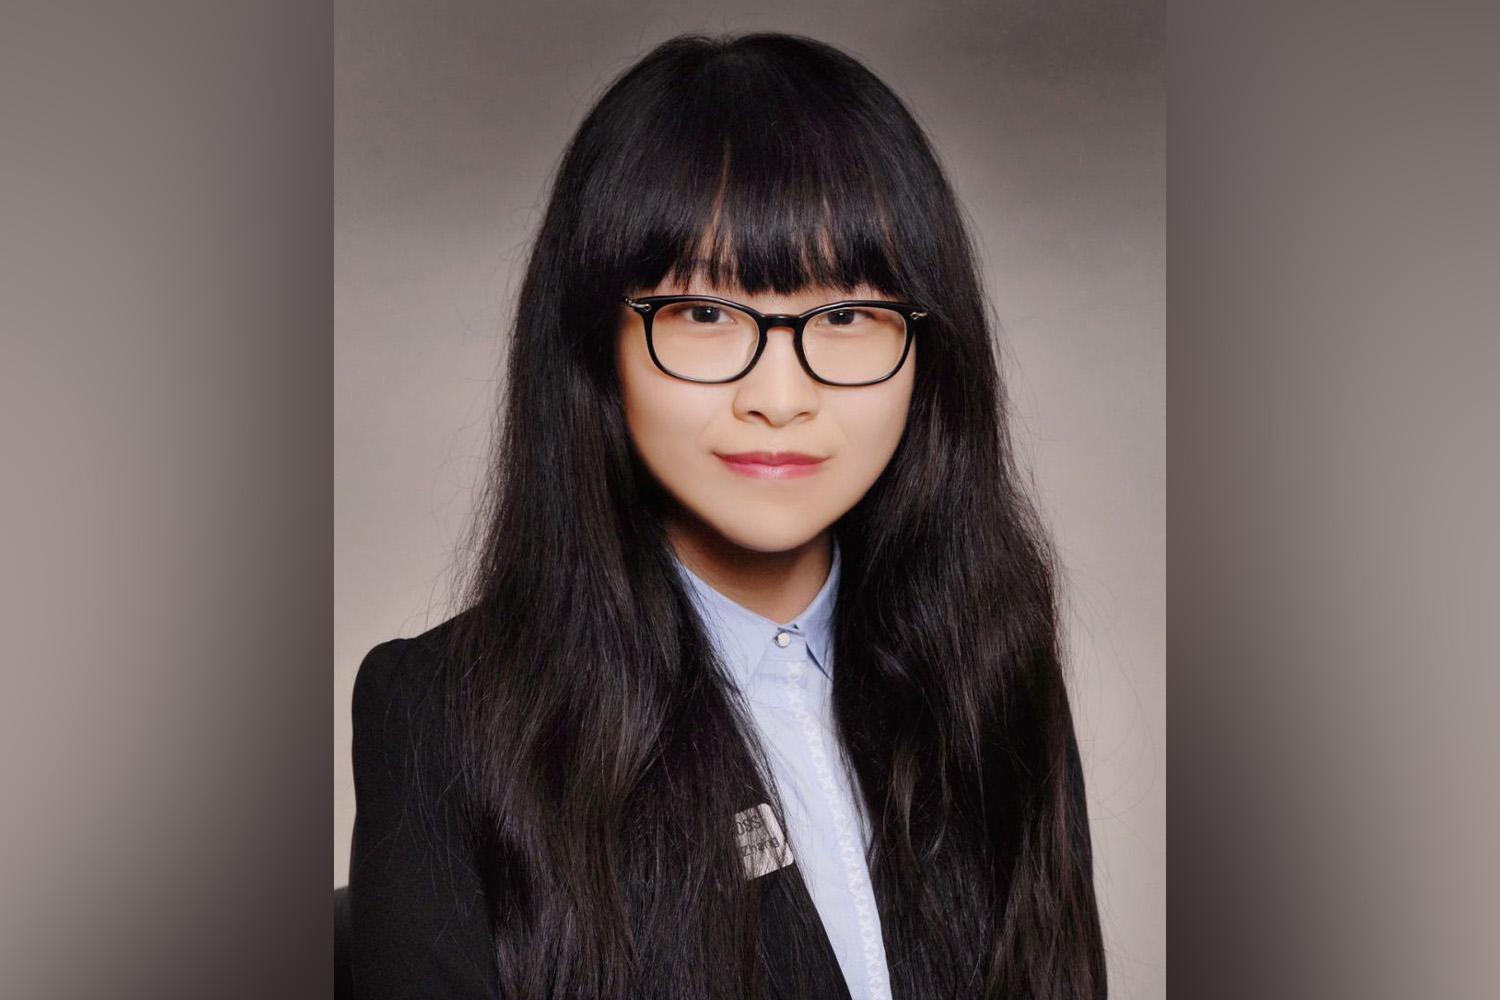 Ph.D. candidate Kangkang Zhang (above) was awarded a $25,000 dollar Fellowship by the Deloitte Foundation. She is one of only 10 scholars who were honored nationwide. (Contributed Photo)